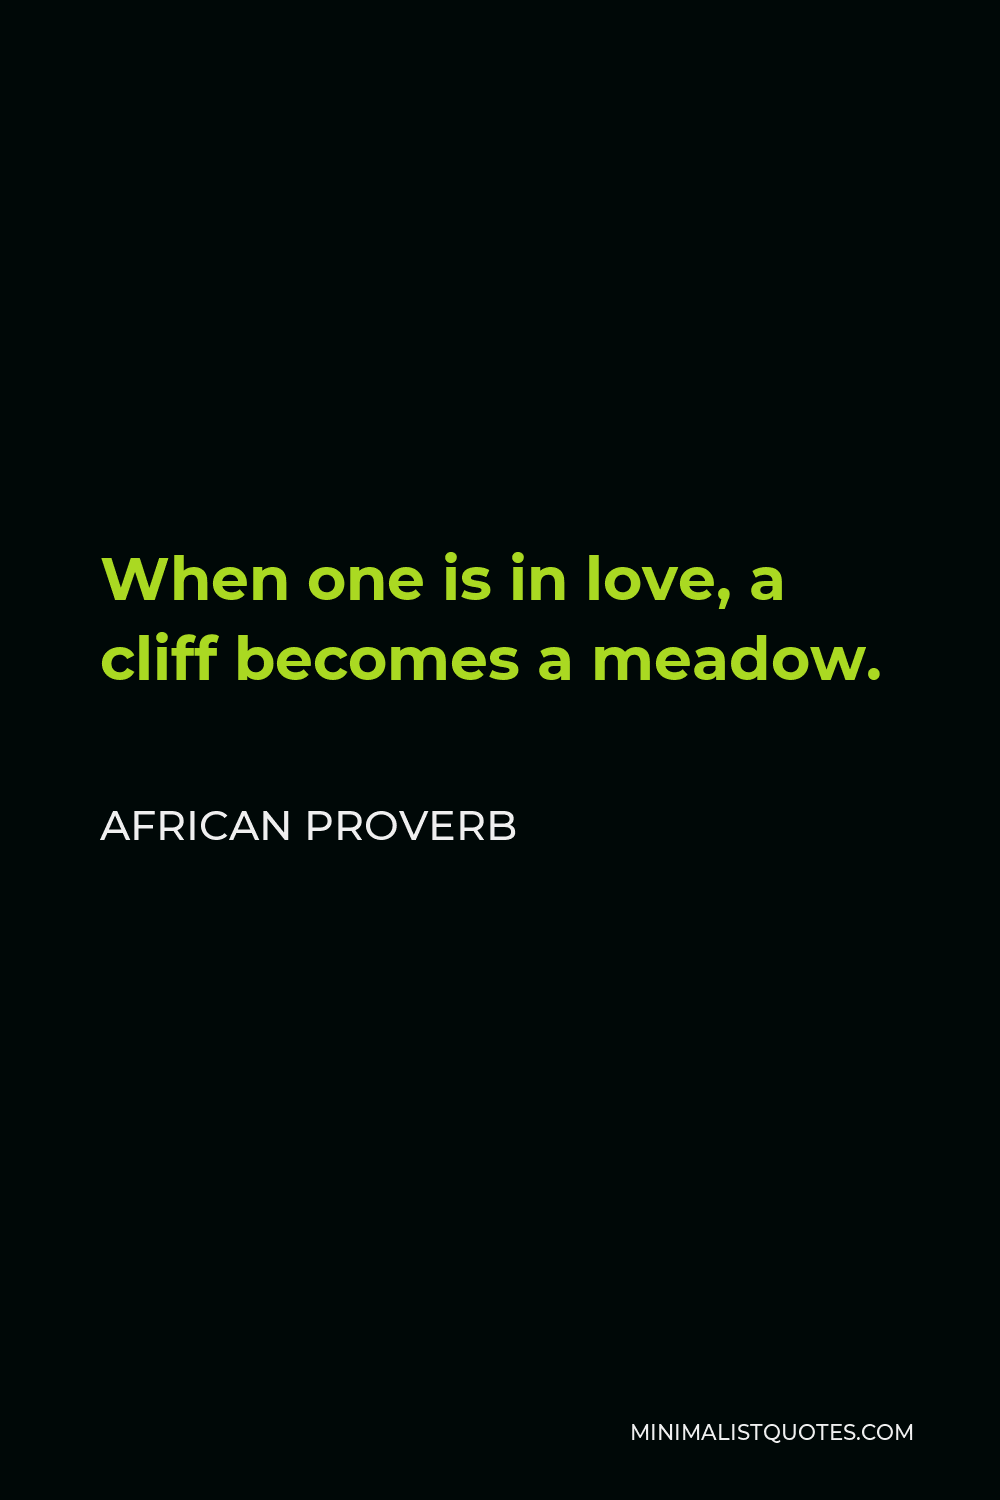 African Proverb Quote - When one is in love, a cliff becomes a meadow.